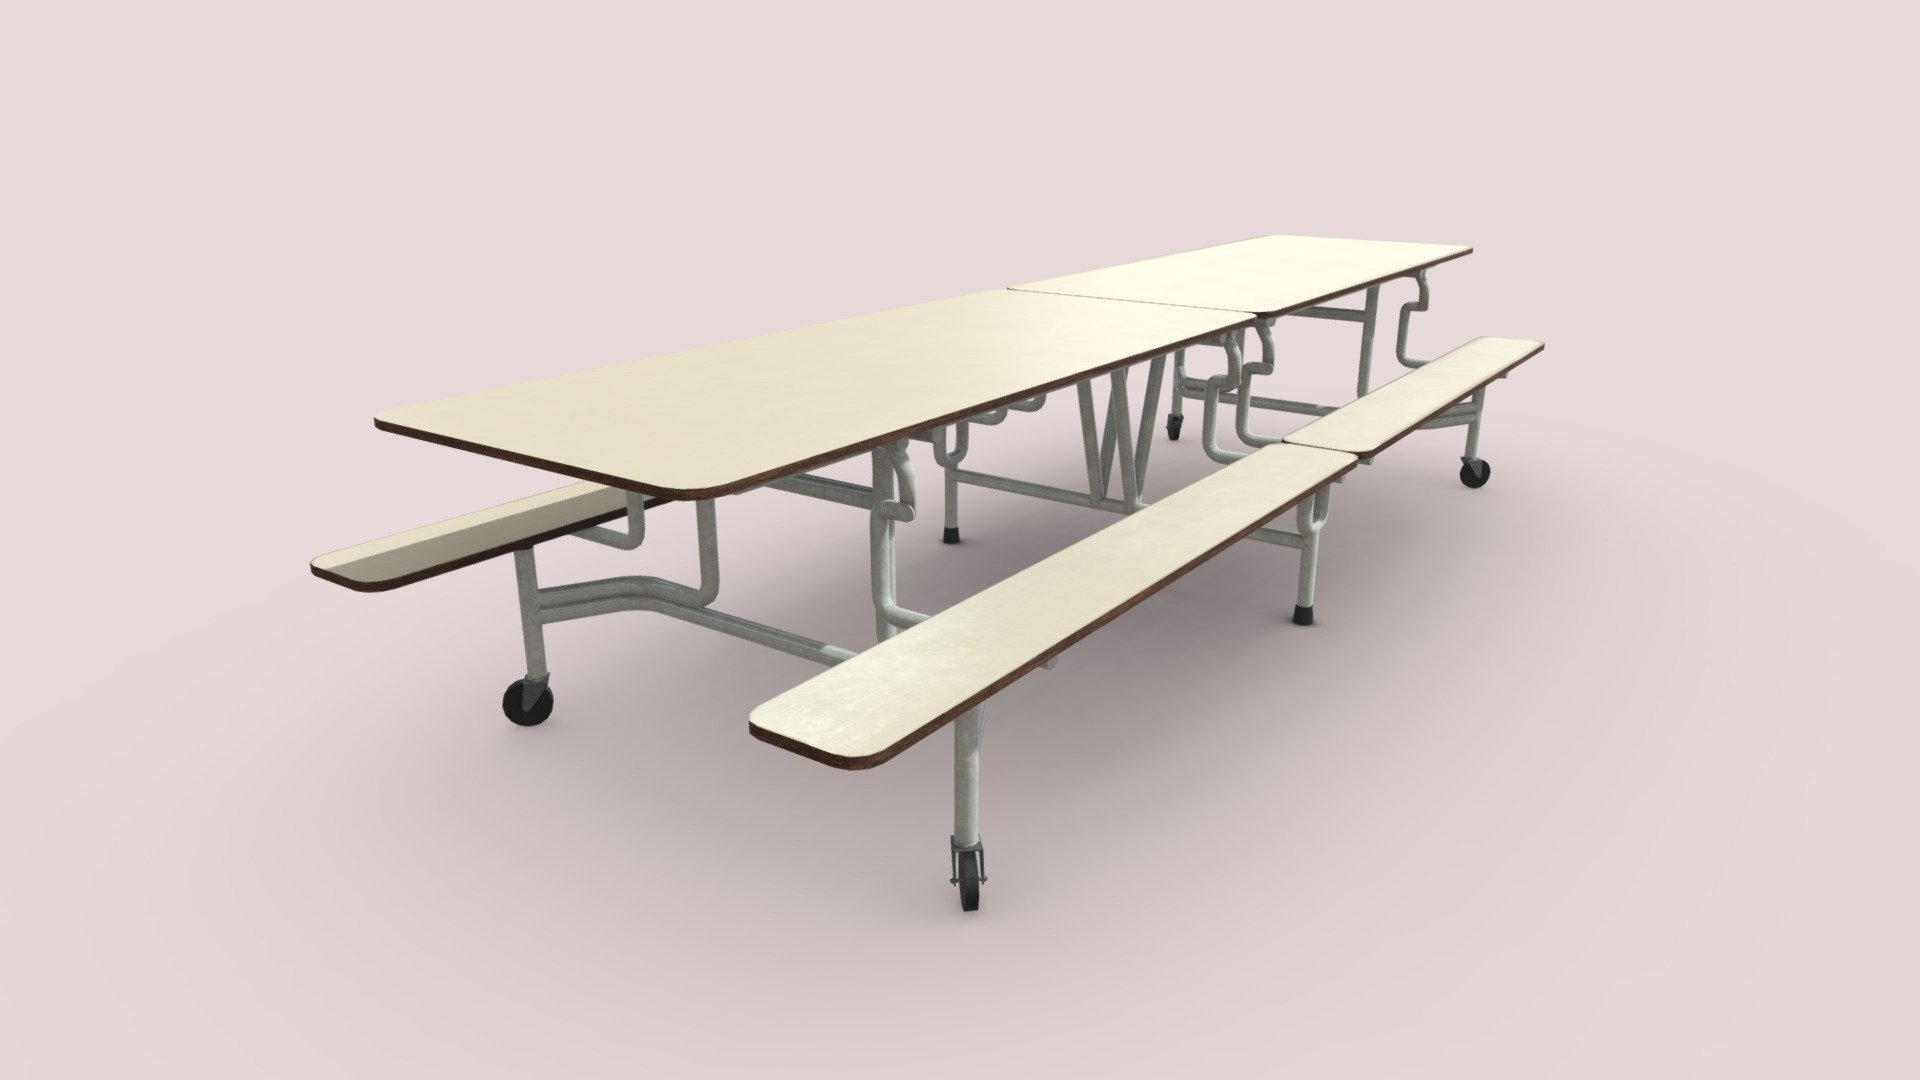 Cafeteria Table based on one that can be found in schools - School Cafeteria Table - Download Free 3D model by Avot 3d model